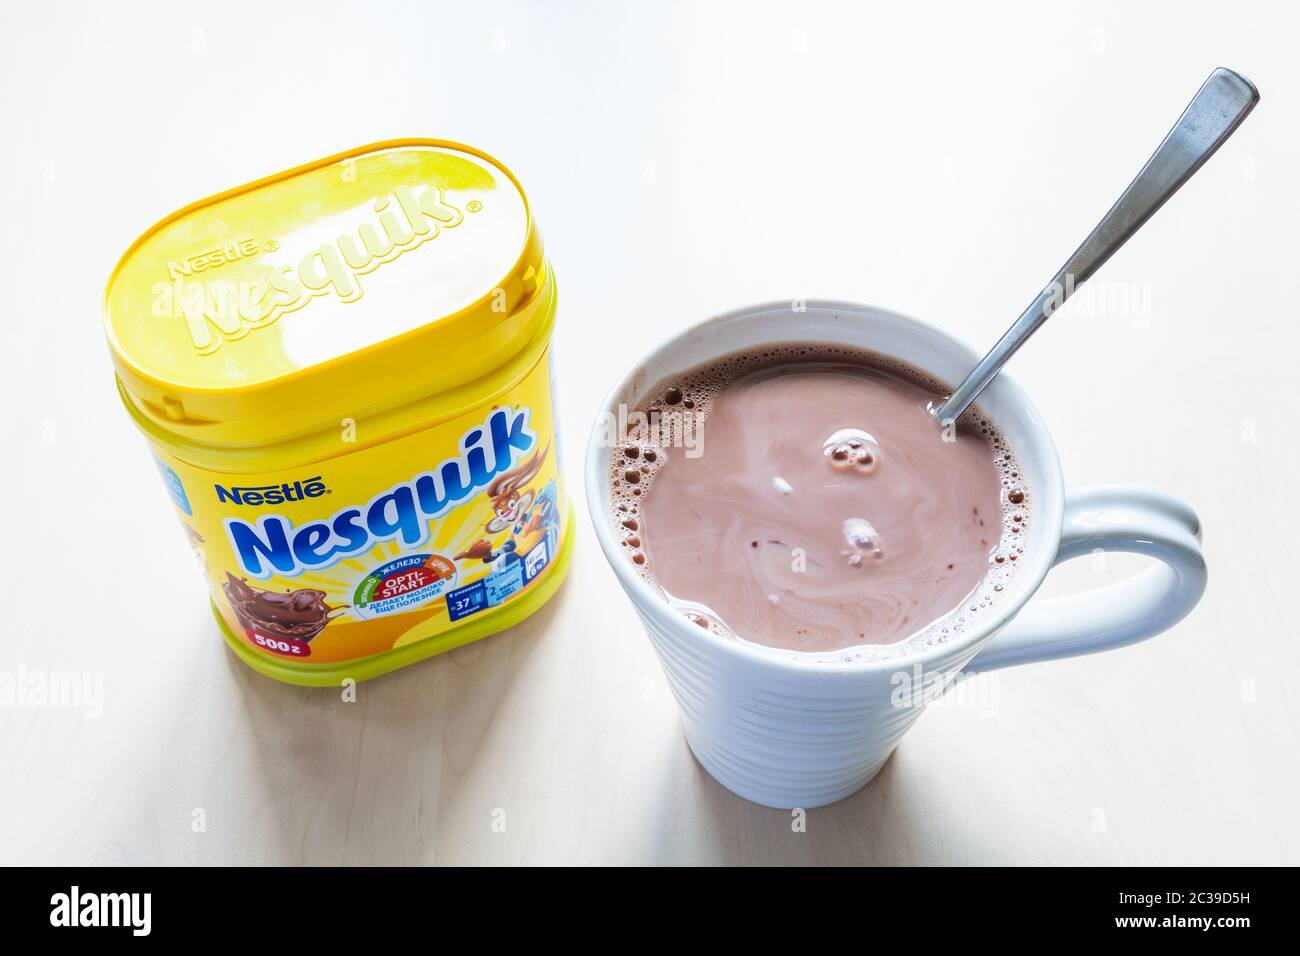 MOSCOW, RUSSIA - JUNE 16, 2020: top view of closed jar of Nesquik and mug with hot chocolate on table. Nesquik Chocolate Powder was introduced in 1948 Stock Photo